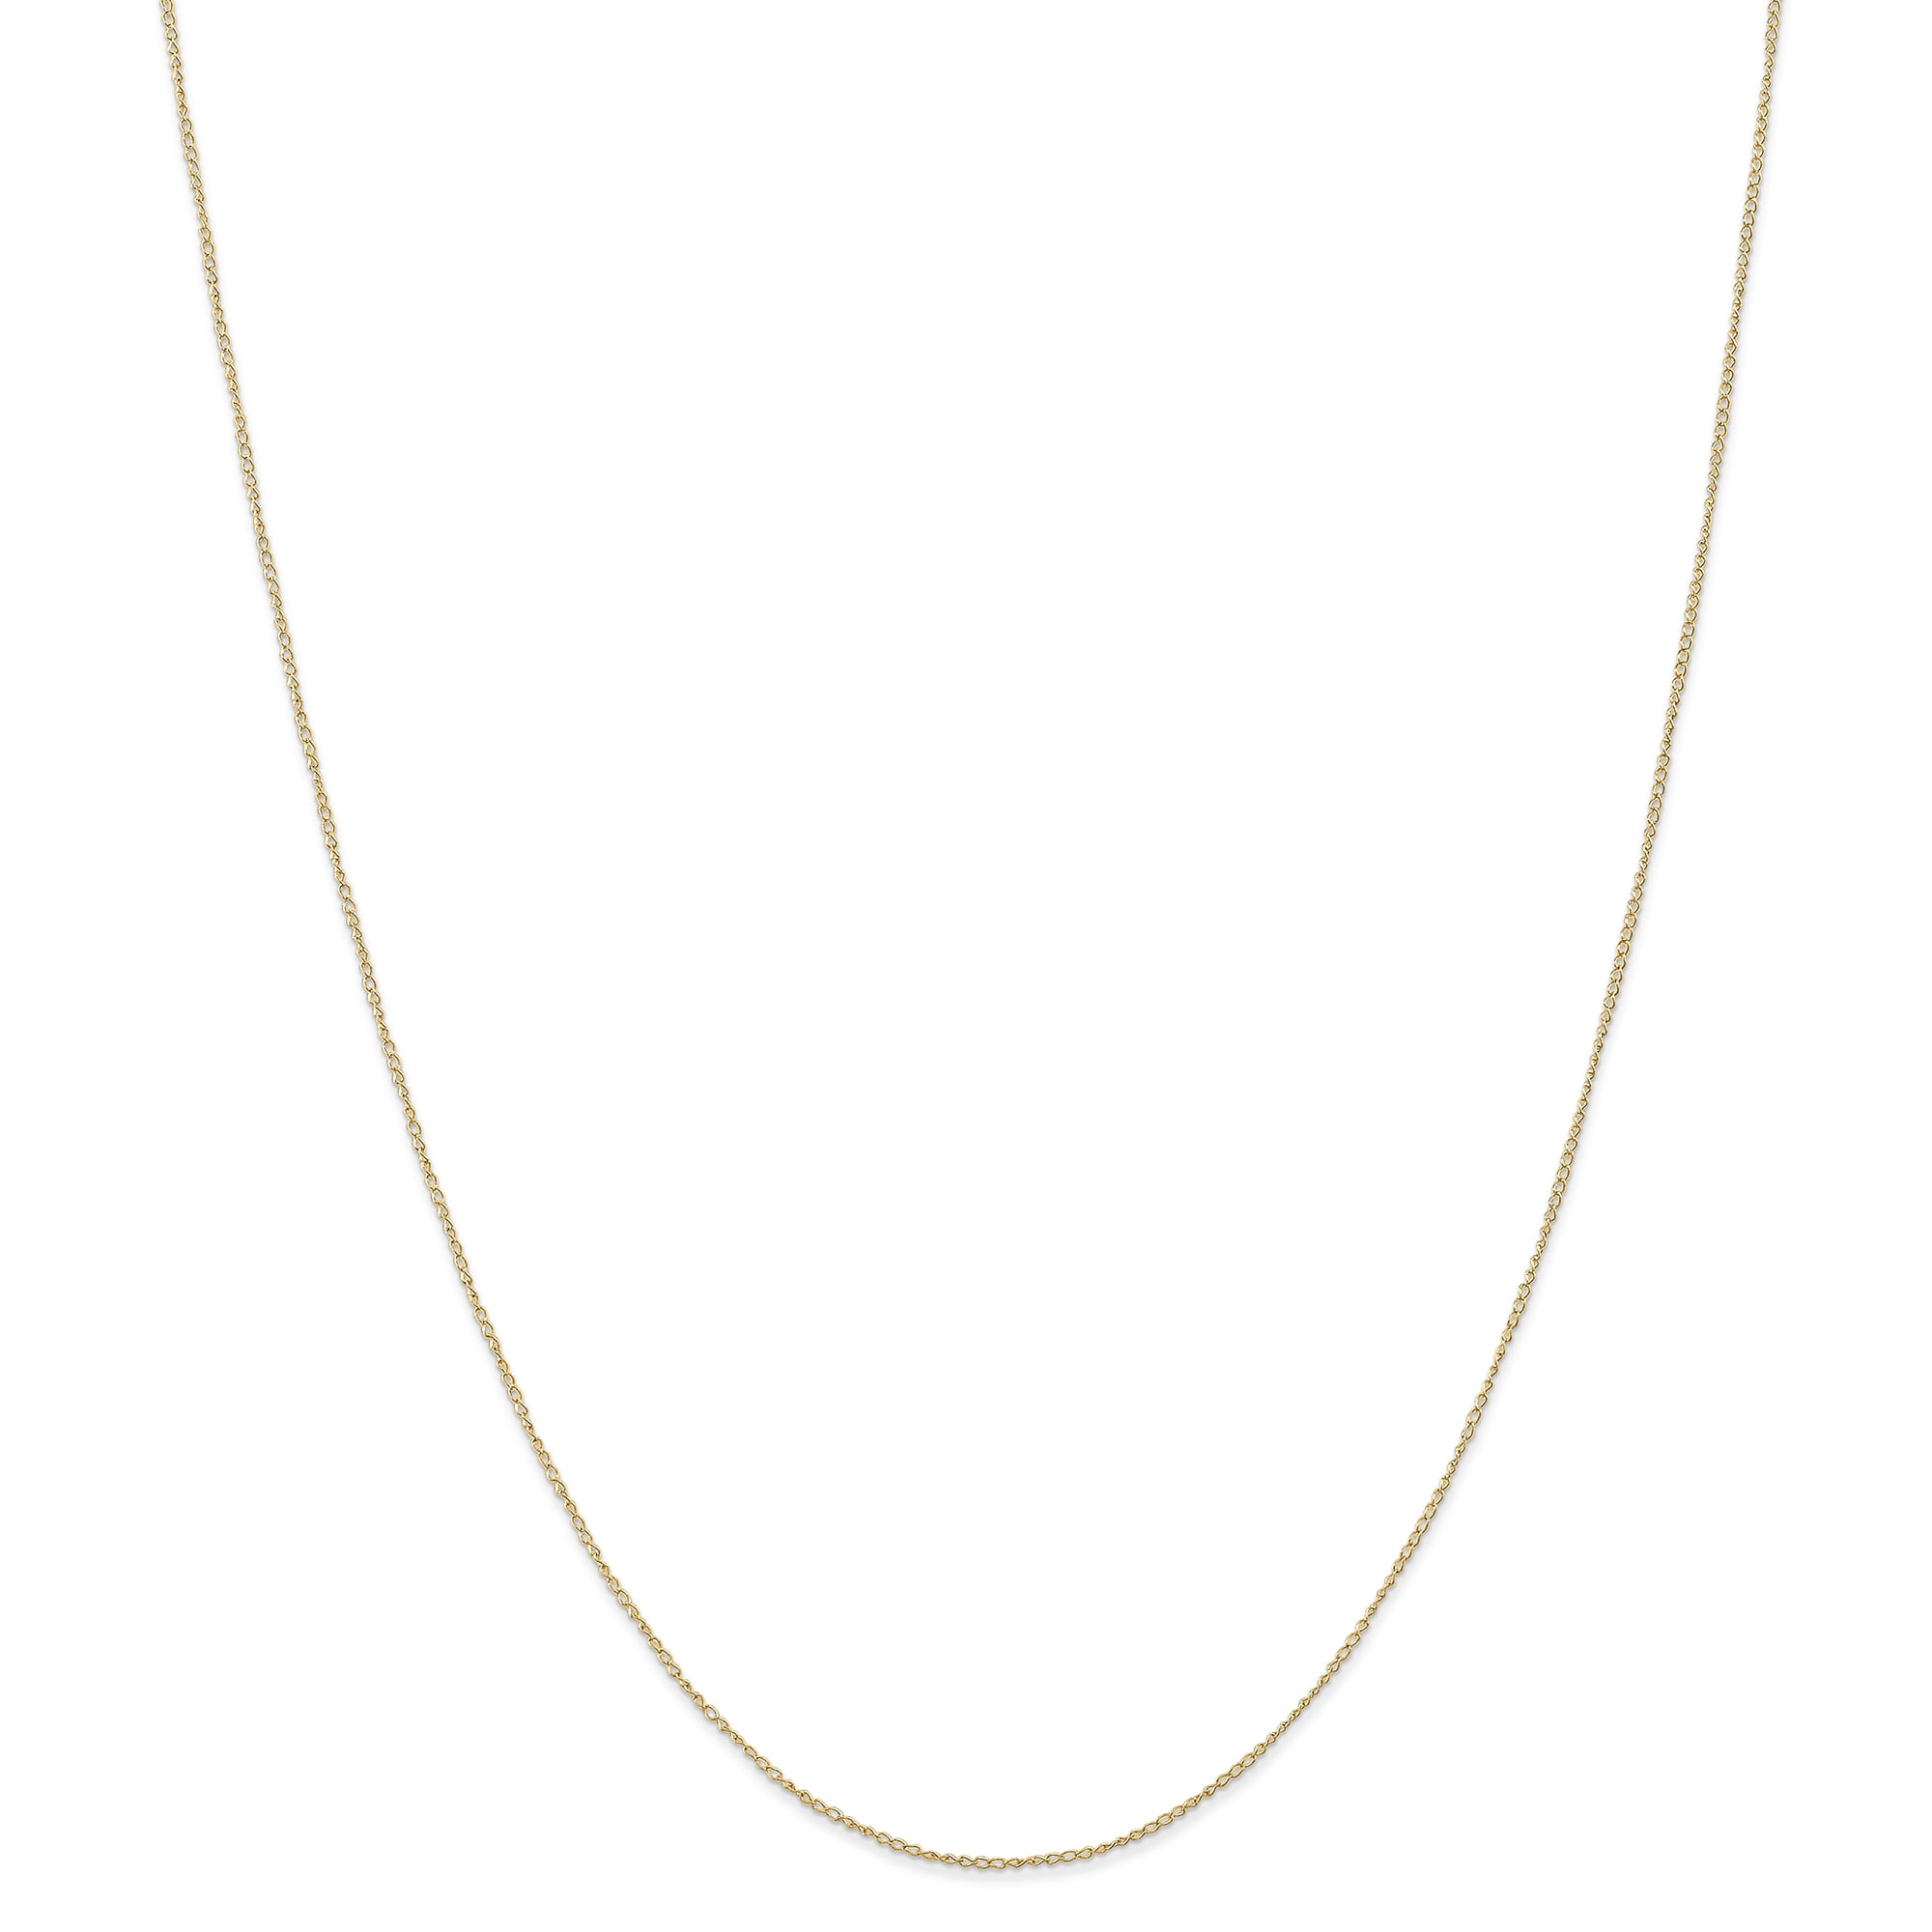 Finejewelers 14 Kt White Gold 16 Inch 1.1mm Bright Cut Milano Chain Necklace with Lobster Clasp